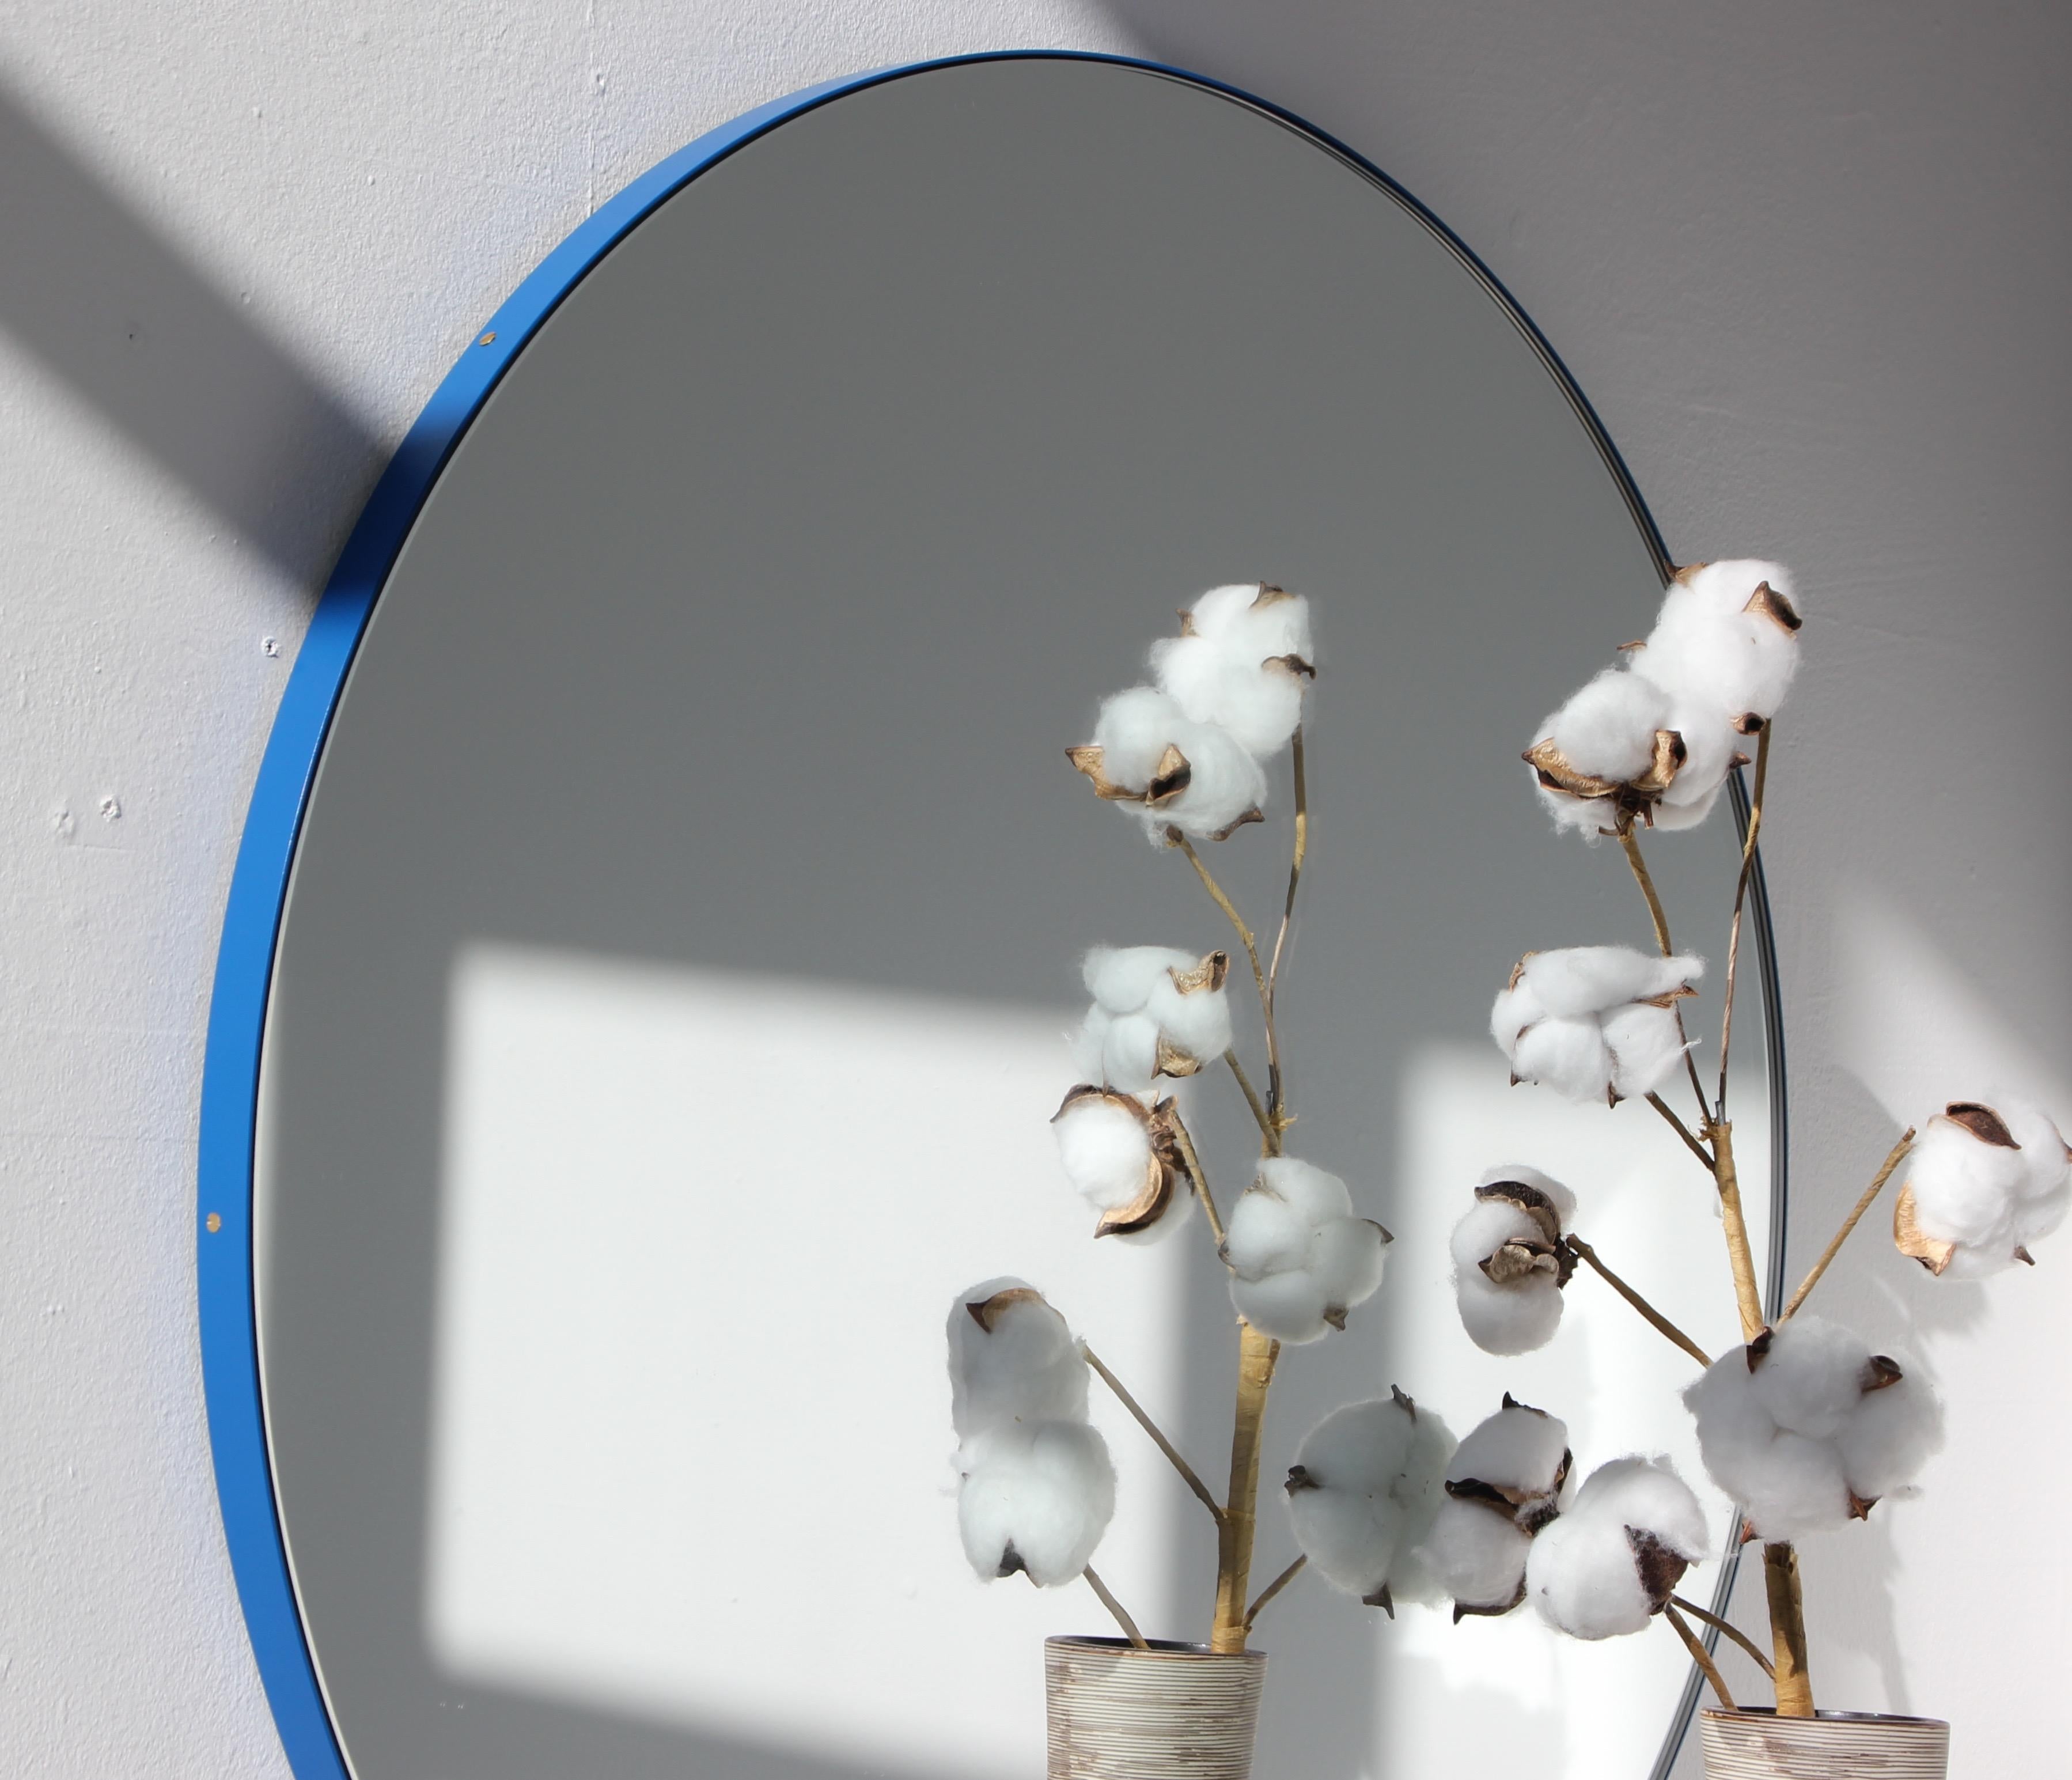 Powder-Coated Orbis™ Round Modern Customizable Mirror with Blue Frame - Large